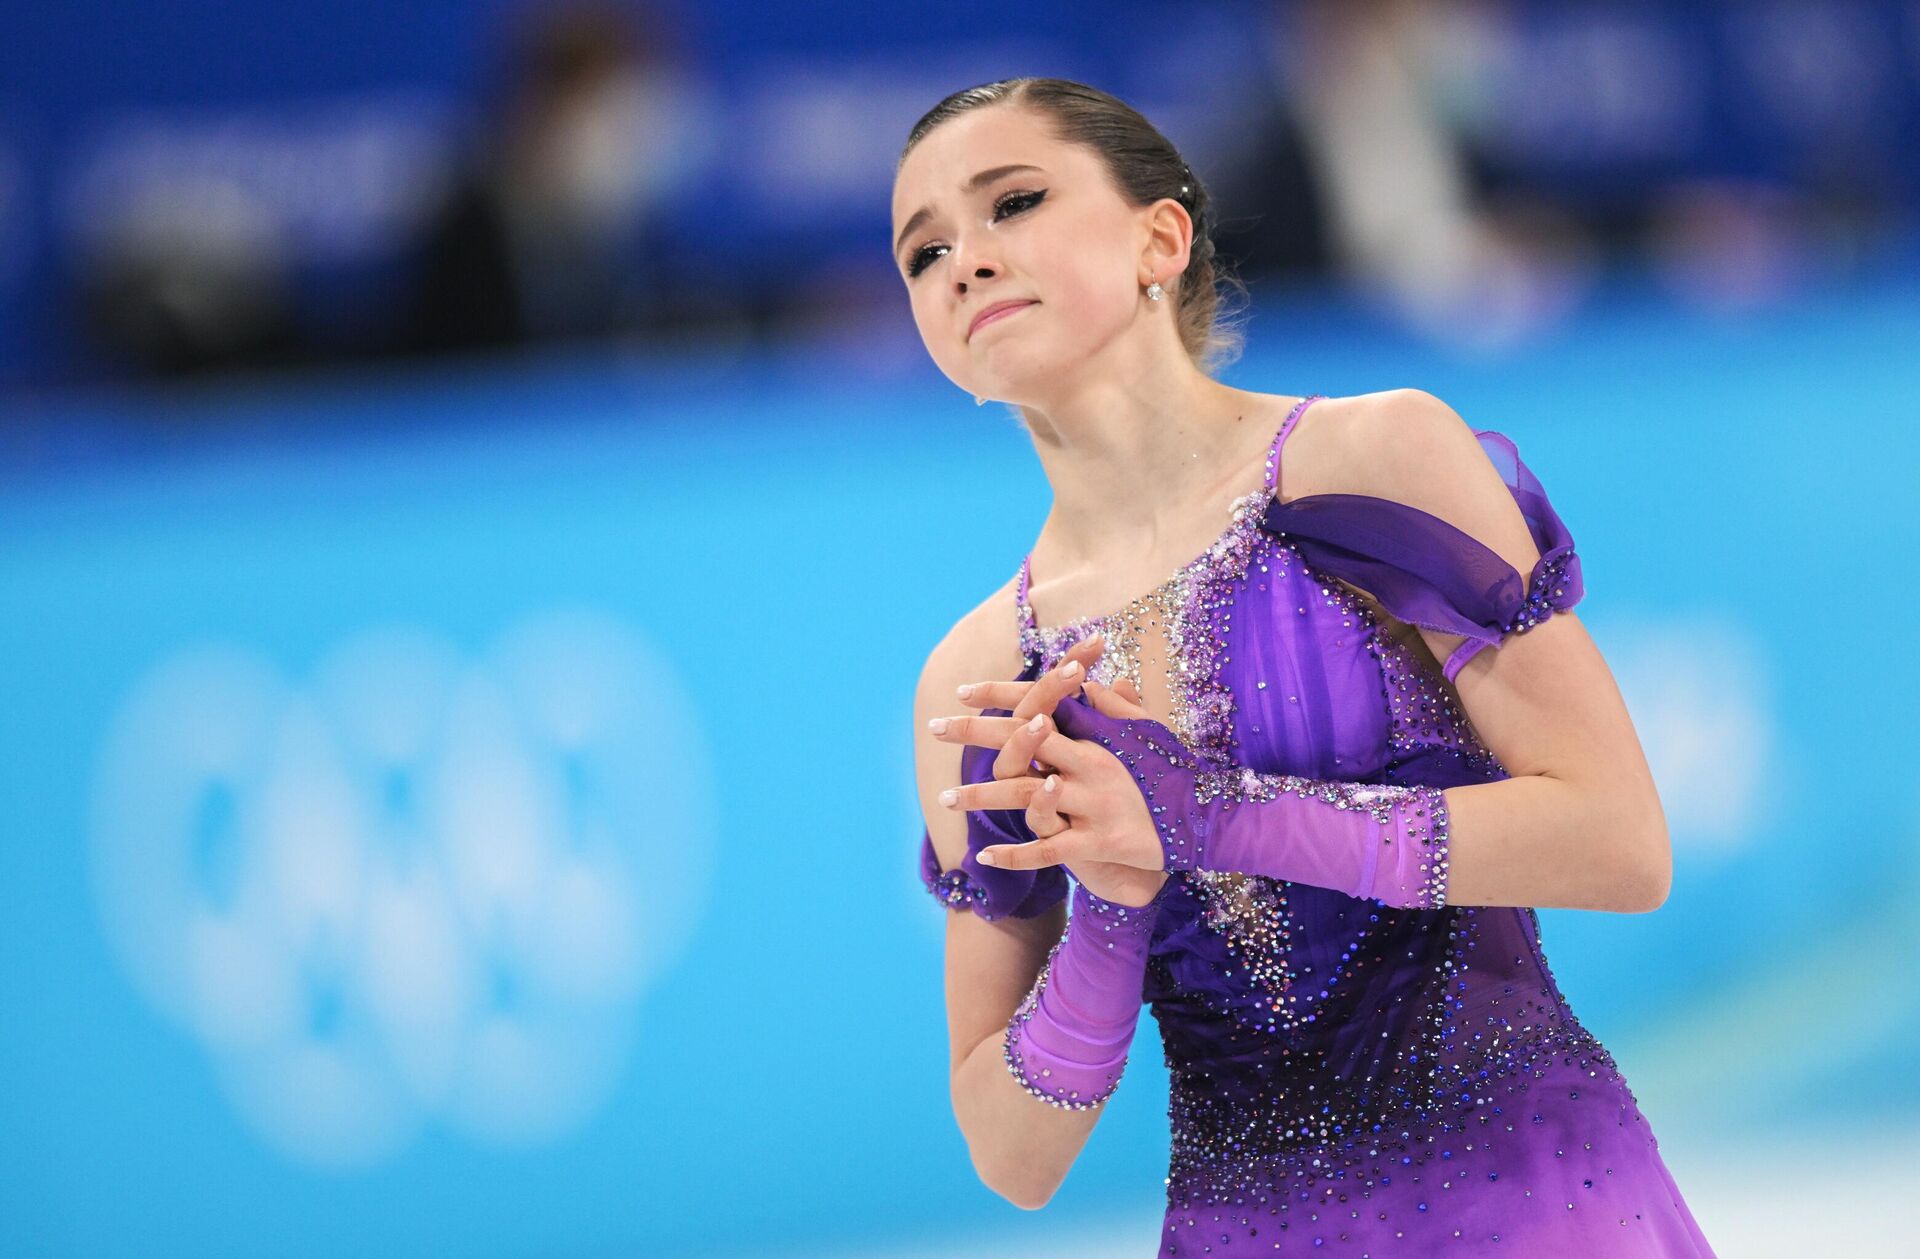 The Russian Olympic Committee's Kamila Valieva competes in the women's singles skating short programme during the Beijing 2022 Winter Olympic Games. - Sputnik International, 1920, 16.02.2022